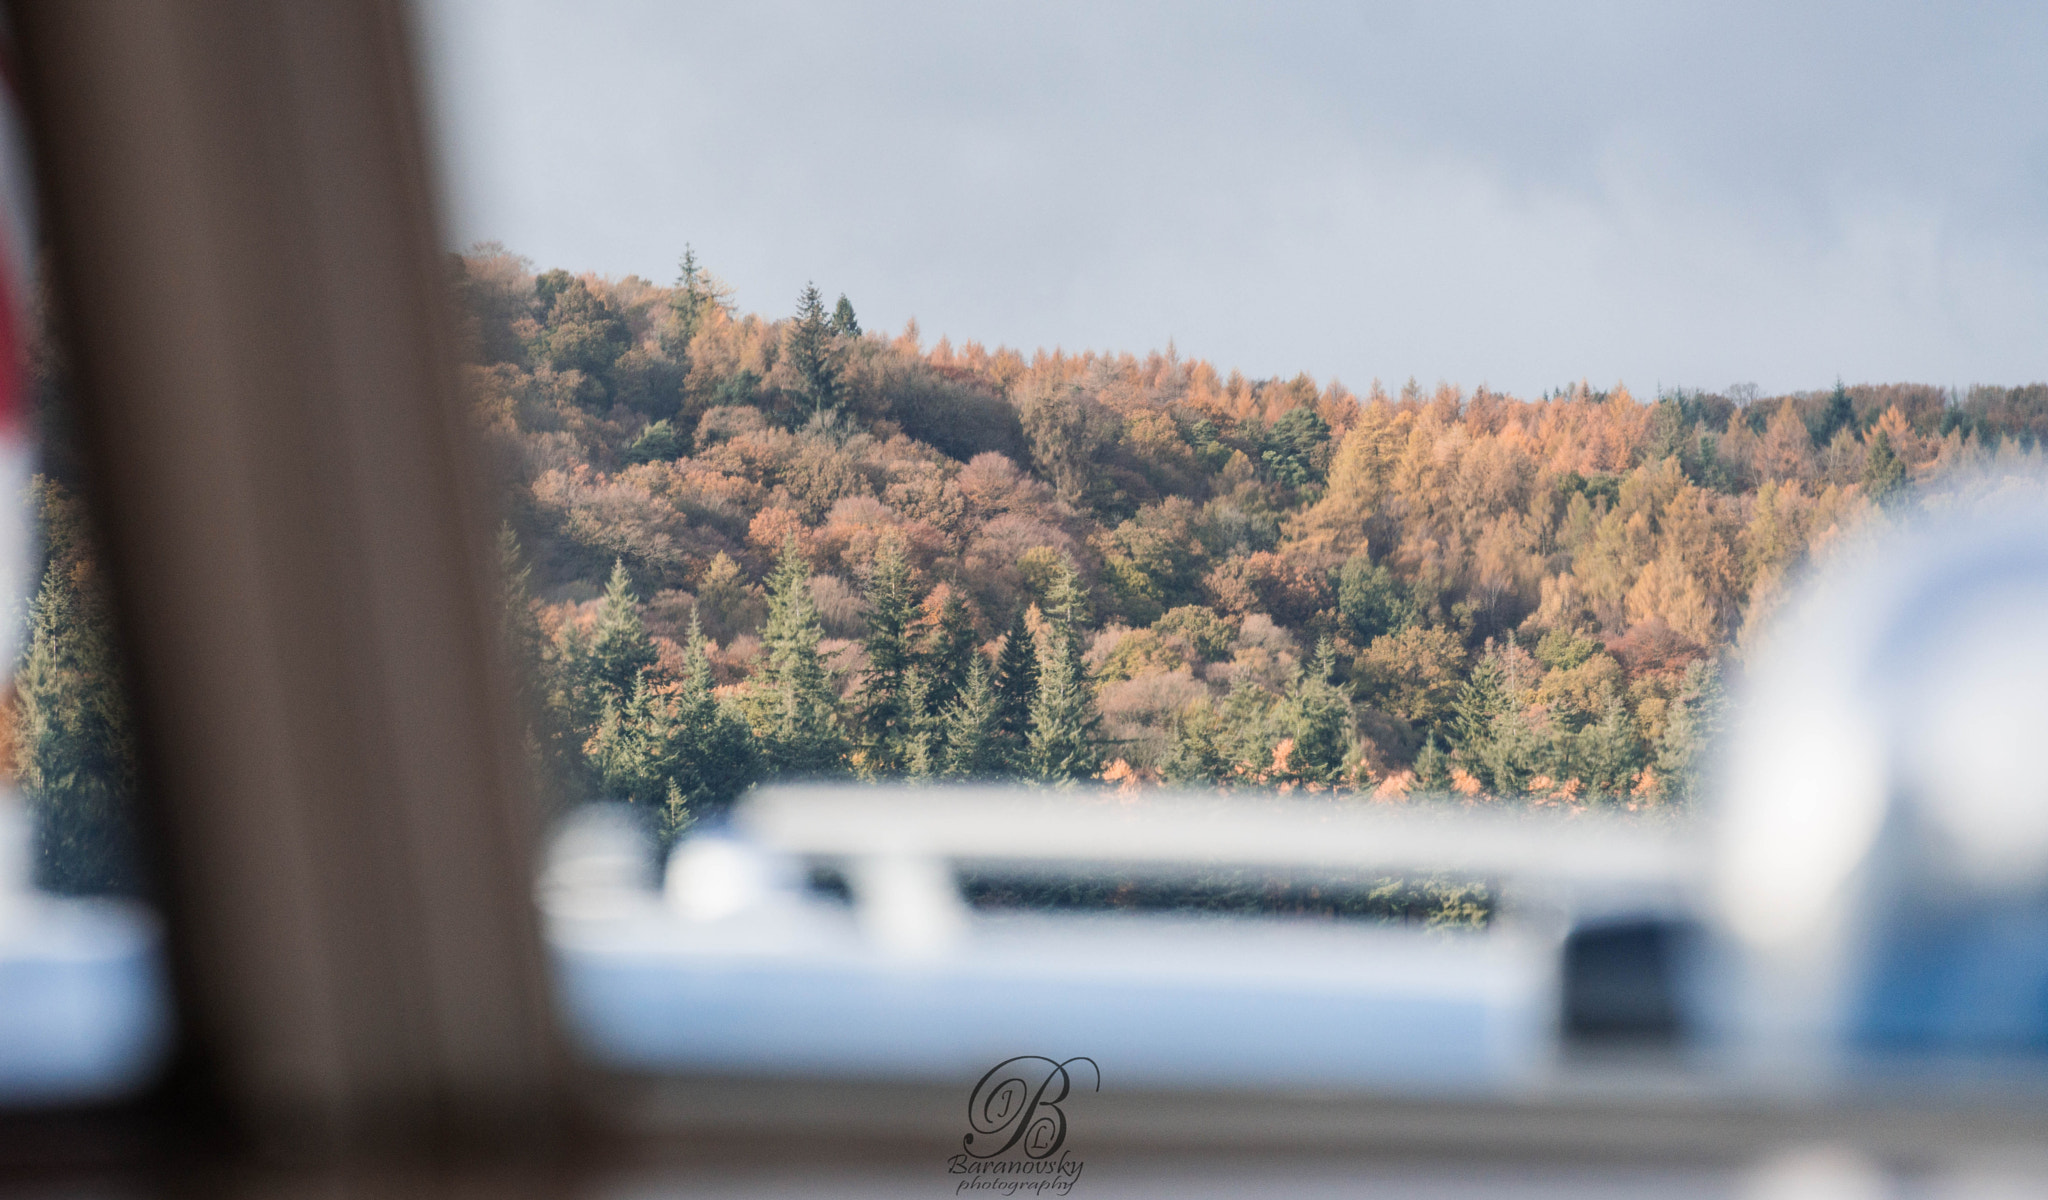 Sony a6000 + Tamron 18-270mm F3.5-6.3 Di II PZD sample photo. View from the boats window on windermere lake towards forest photography